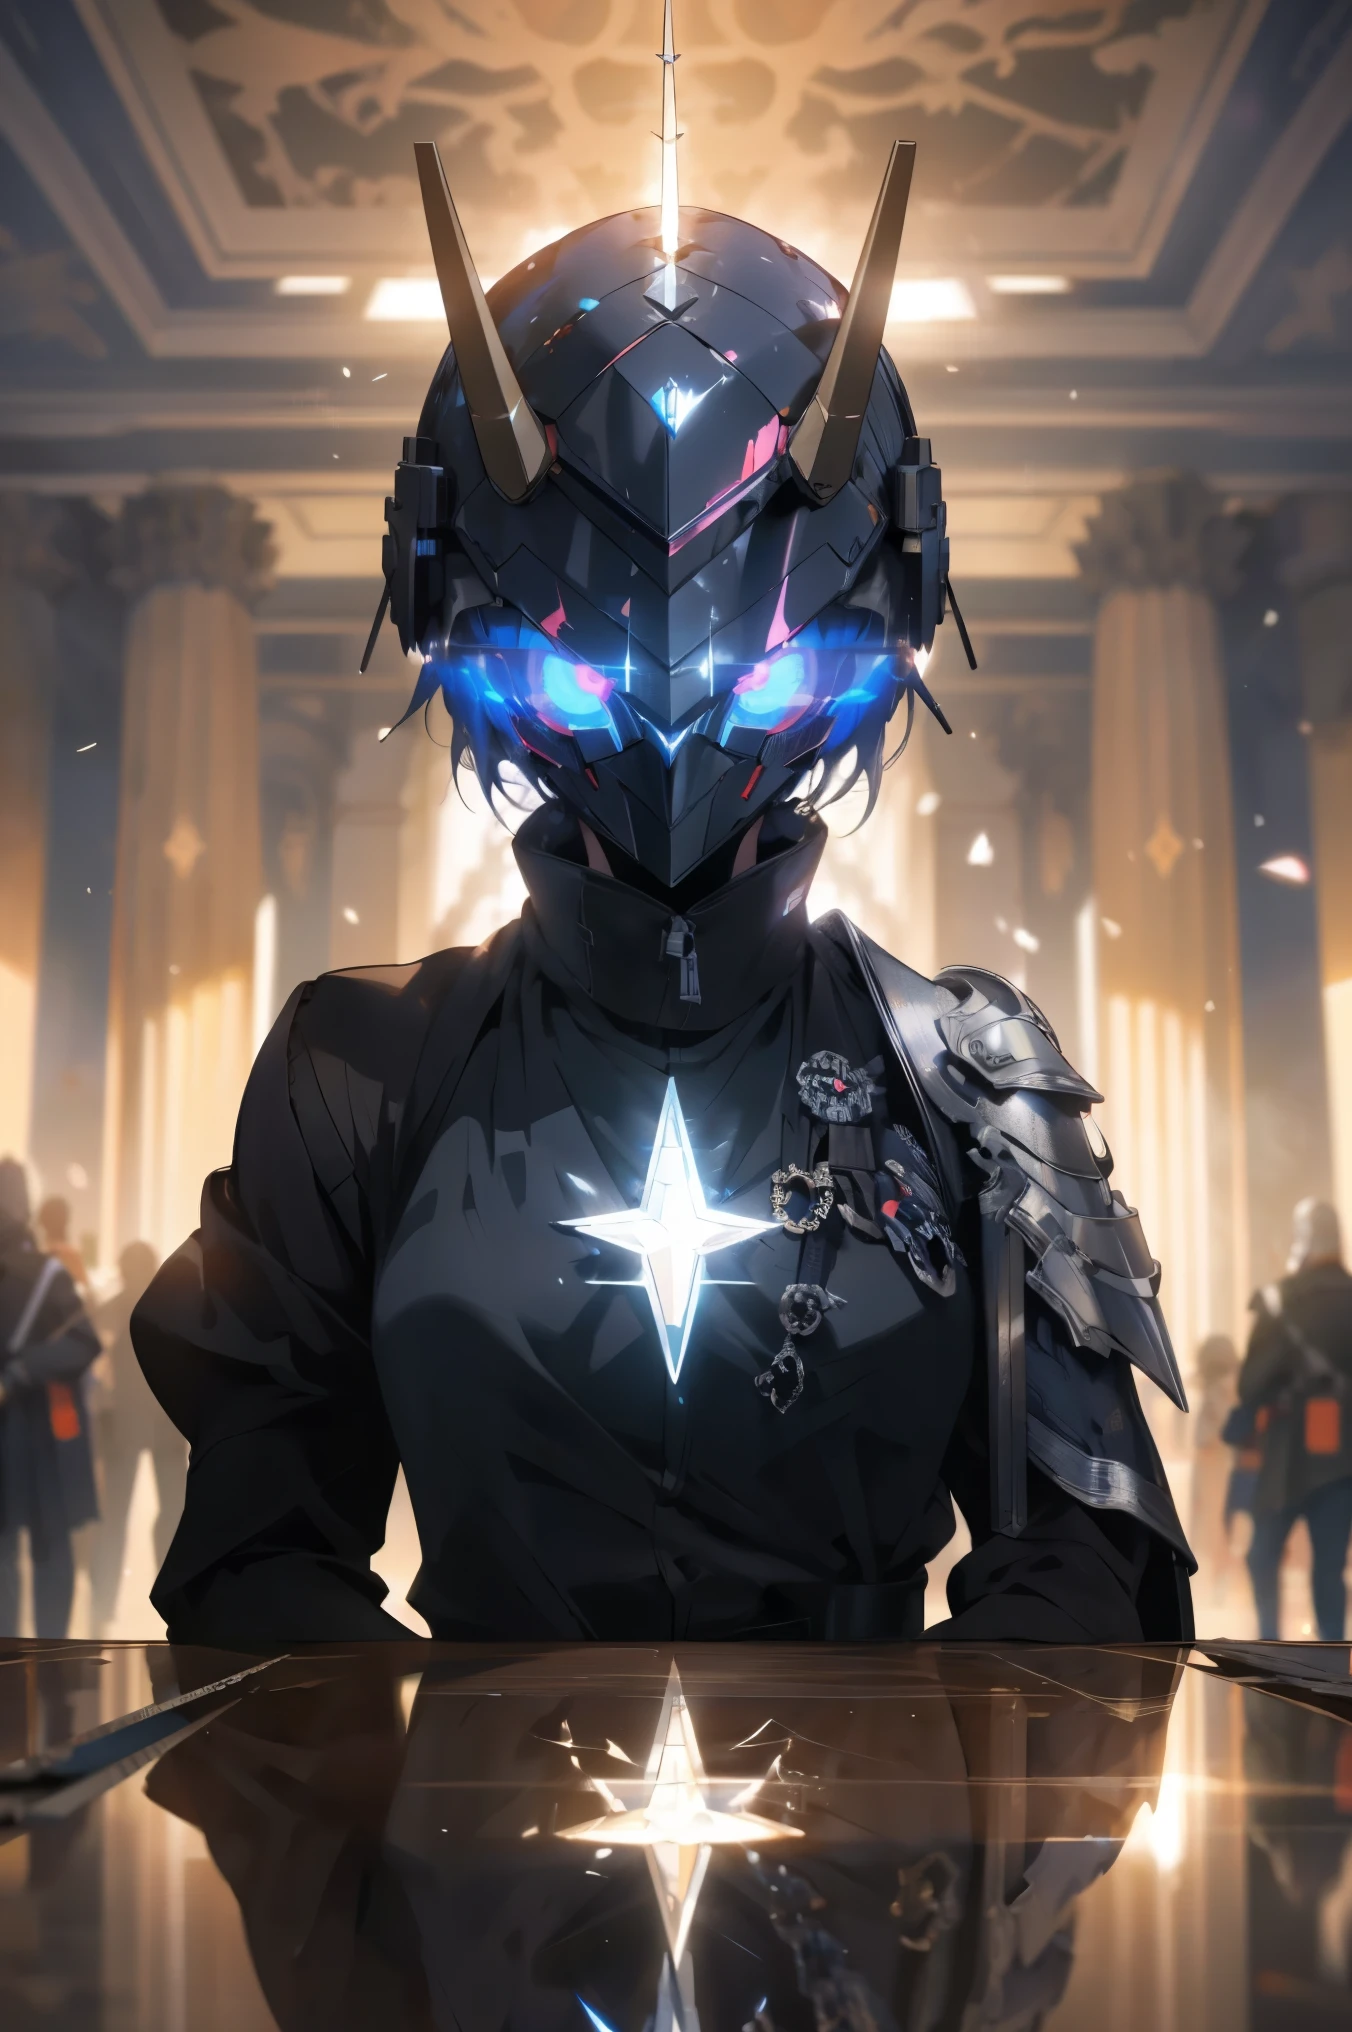 1 girl, No face, mystery, helmet, Unicorn Horn, Glowing eyes, Extreme detail, Lustrous metal, Dynamic Angle, Detailed lighting, dramatic_shadow, Rays_track, reflection,Raw, Lenses, (Clear focus:1.5), (Reality:1.2), Dusk lighting, Volumetric Lighting, Ultra-high resolution, 16K,dramatic lighting,